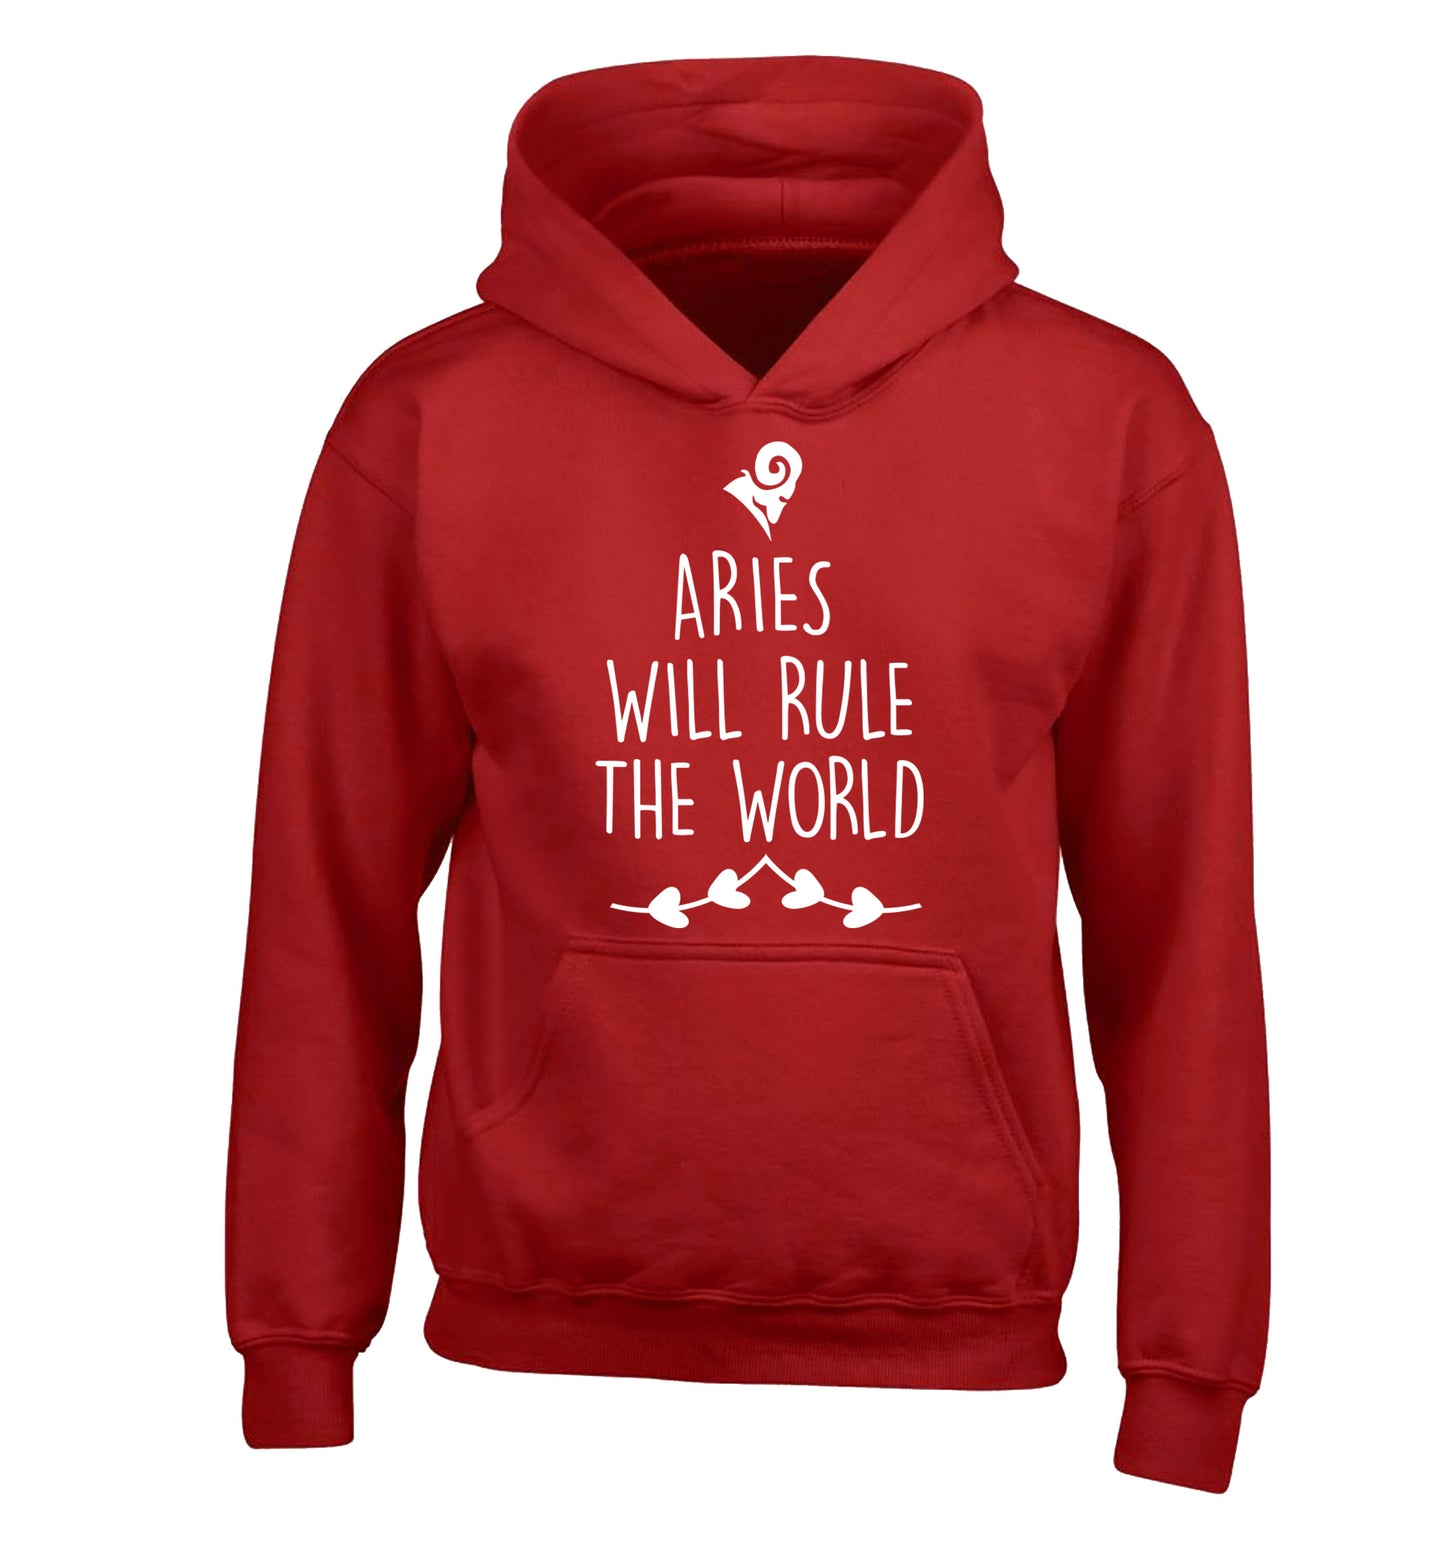 Aries will rule the world children's red hoodie 12-13 Years